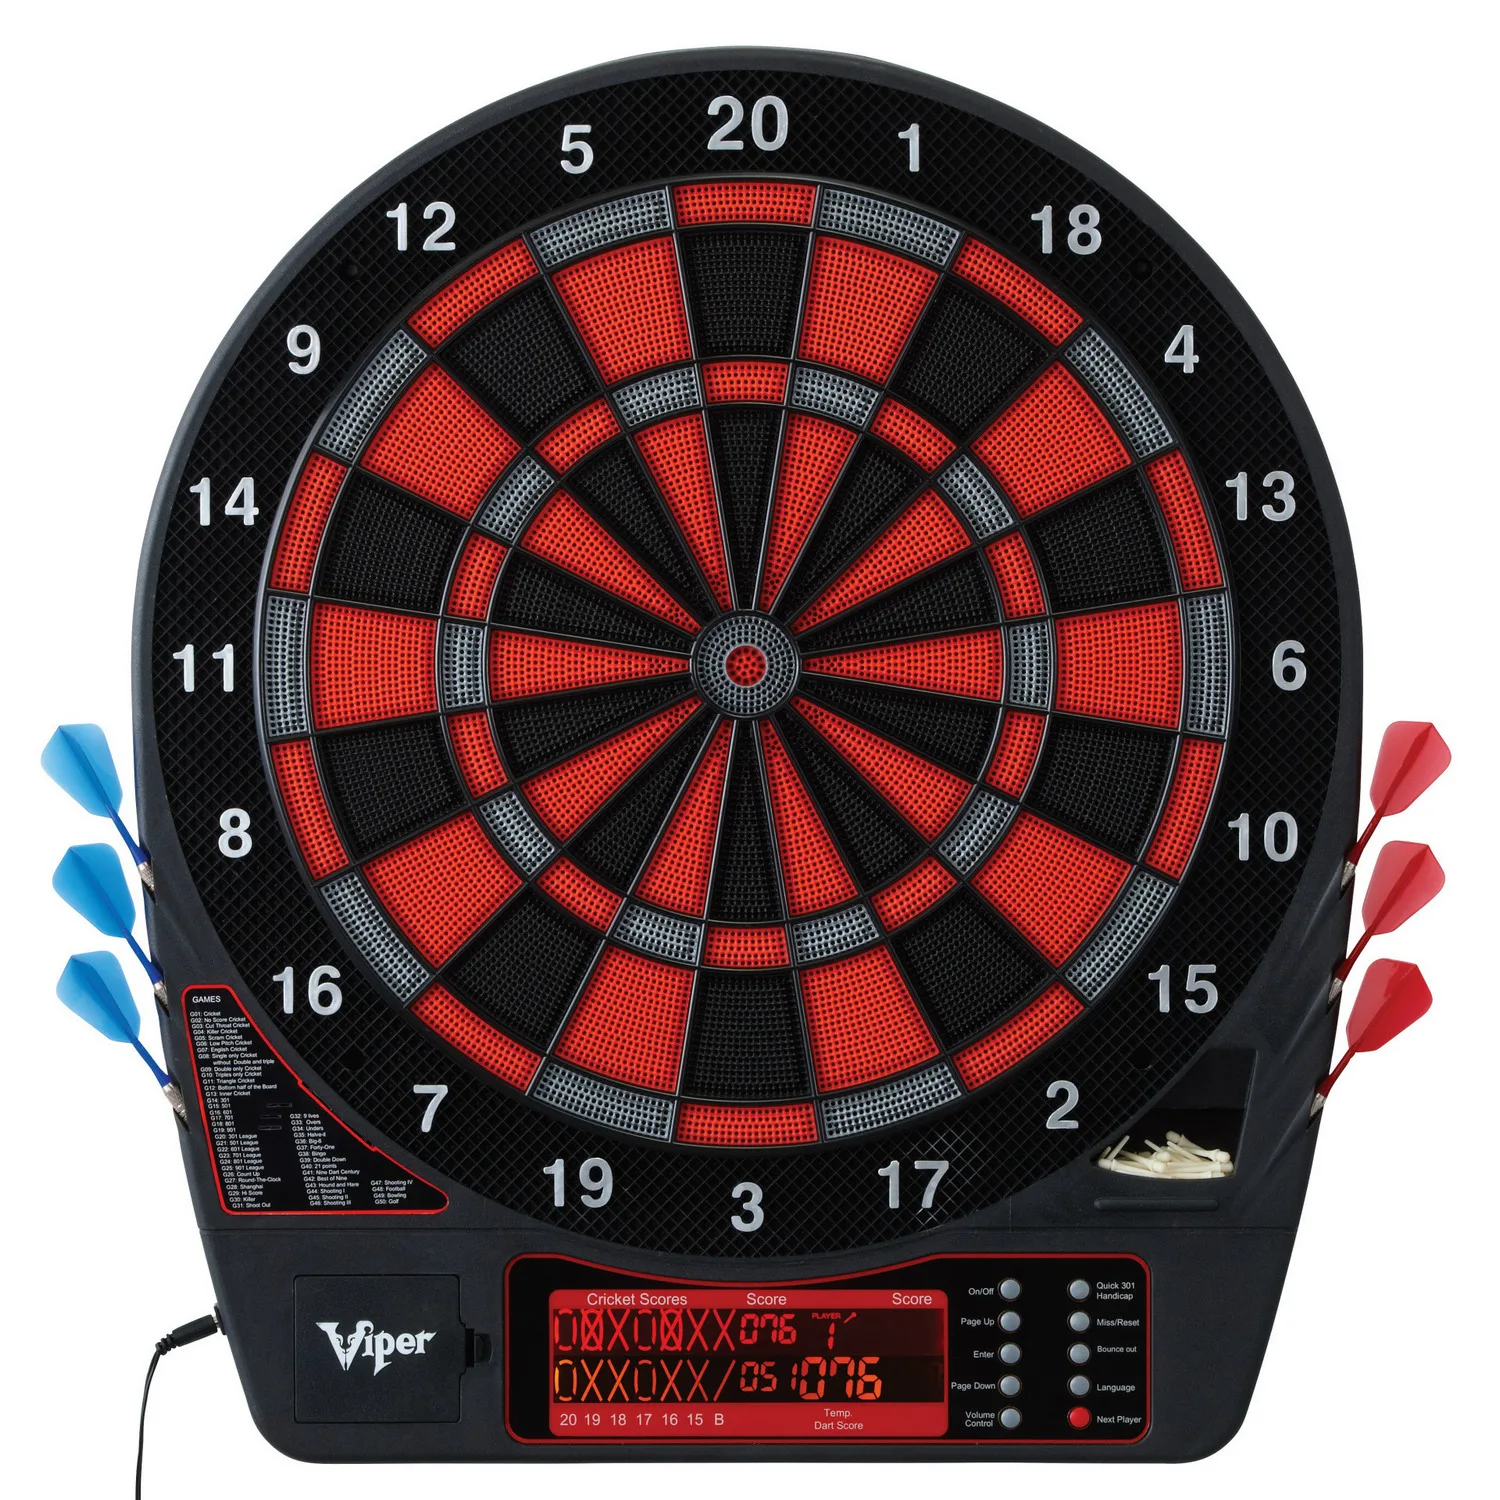 Original  Viper Specter Electronic Dartboard Pro Size 50 Games Height LCD Display Scoreboard with Impact-Tough Nylon Target